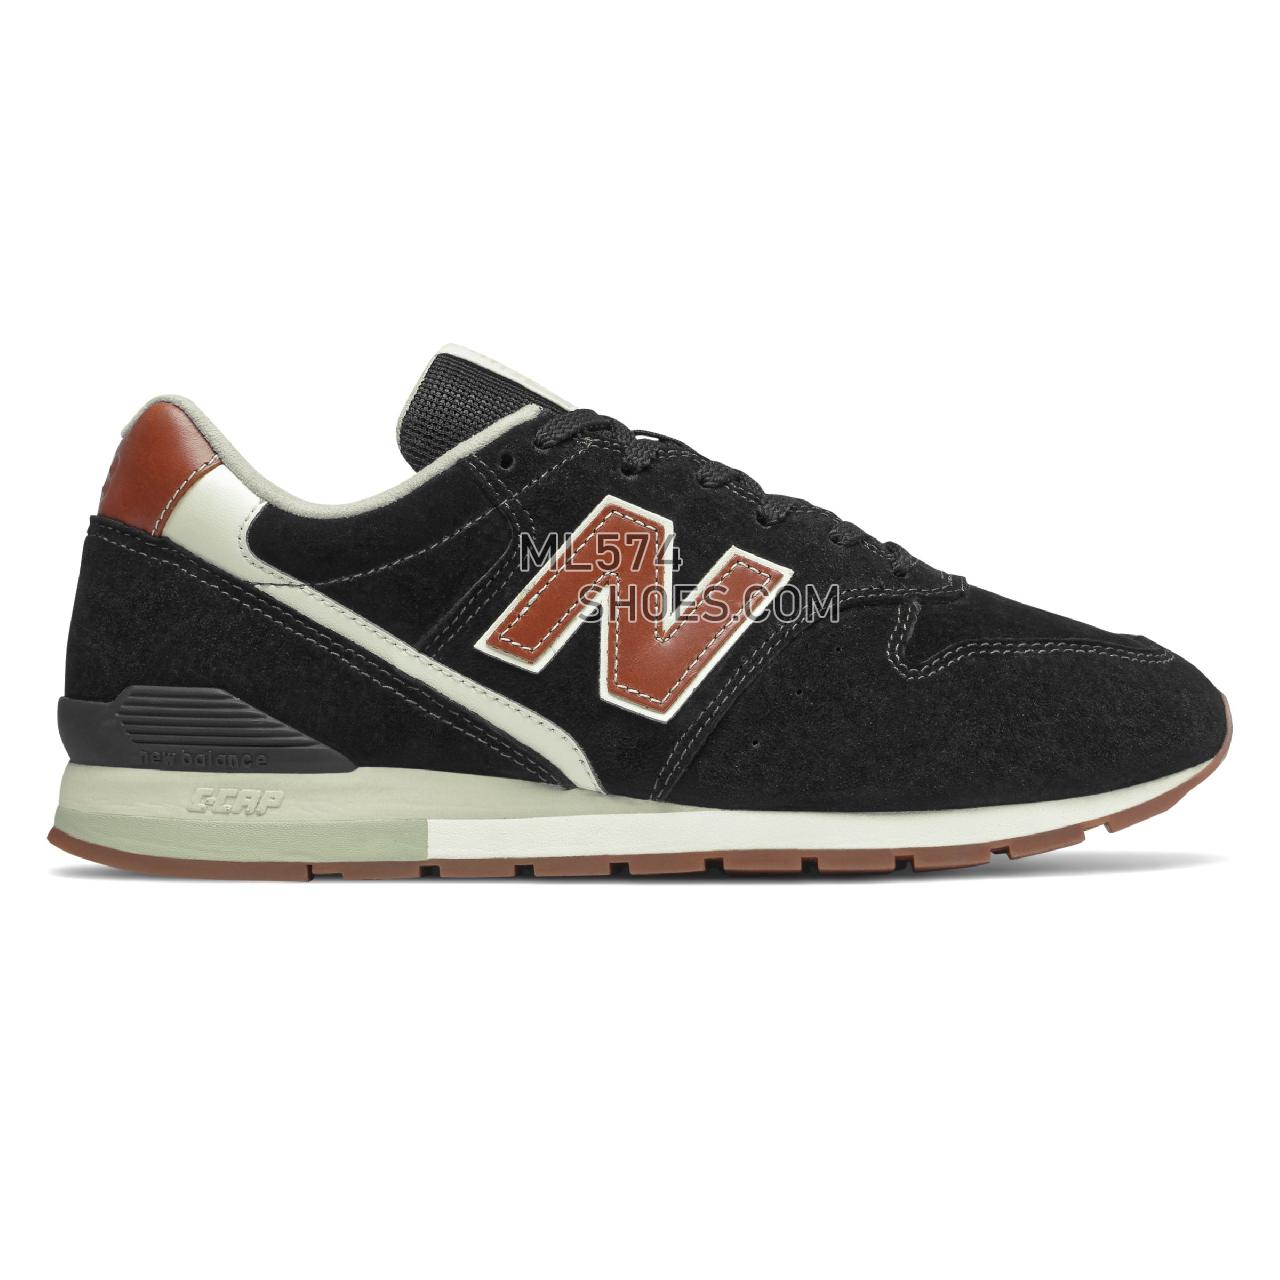 New Balance 996v2 - Men's Classic Sneakers - Black with Camel - CM996BC